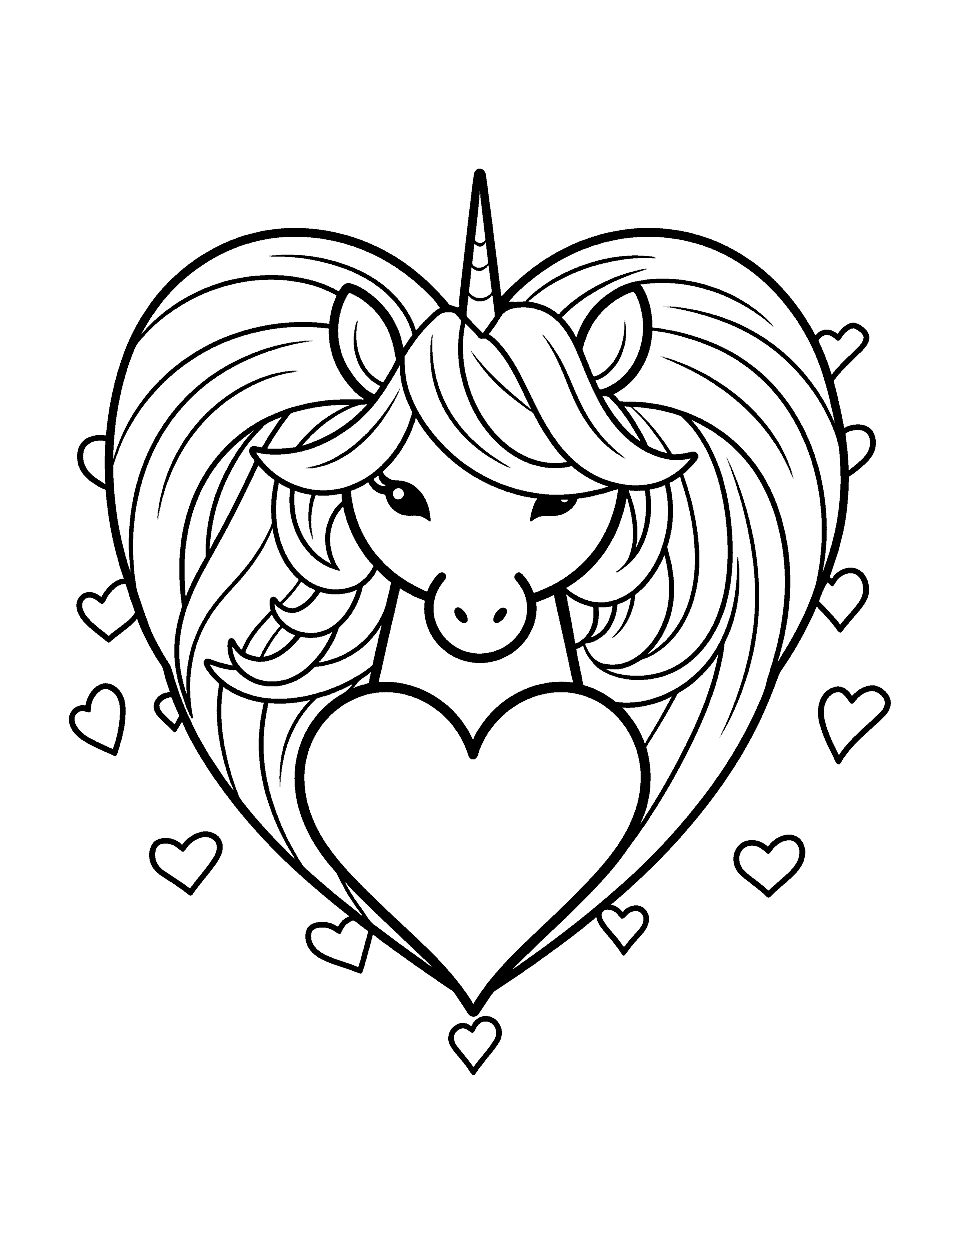 Unicorn with Heart Coloring Page - A cute unicorn holding a heart in its hooves, perfect for kids who love mystical creatures.